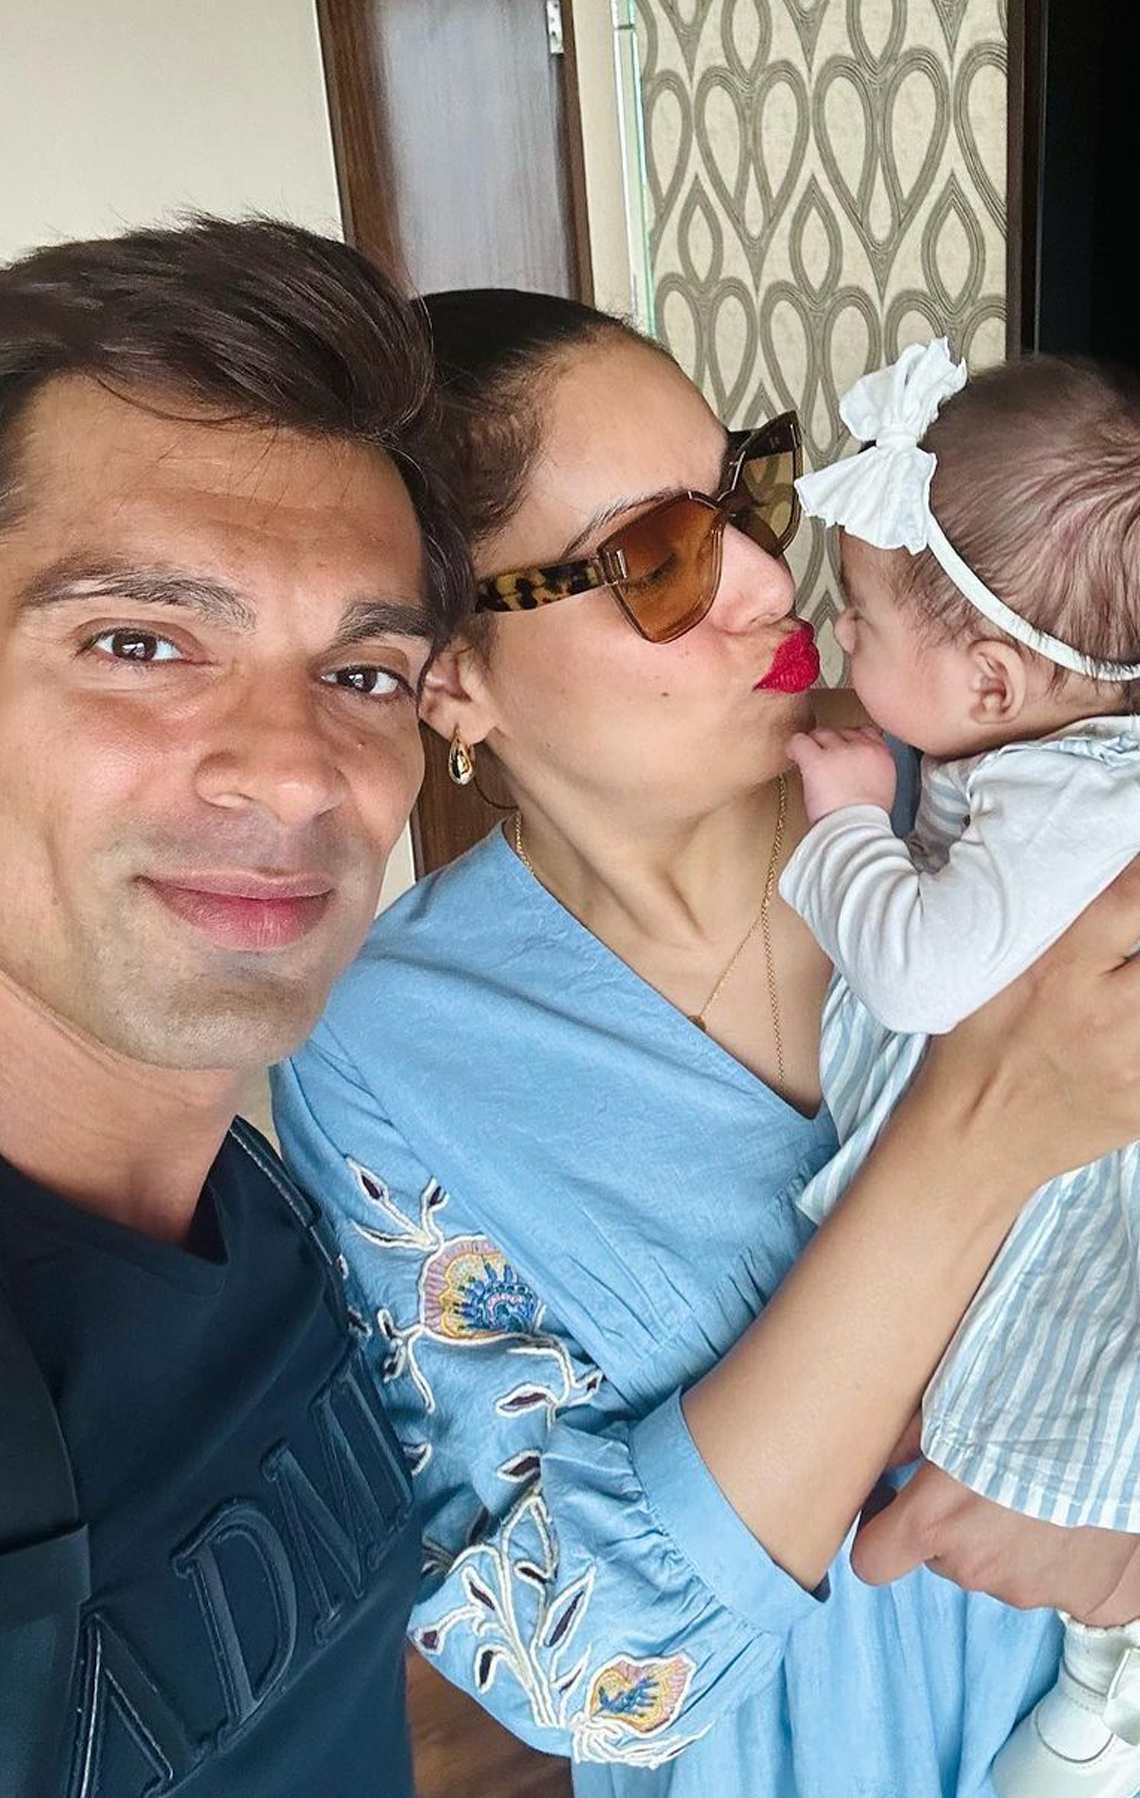 Daddy Karan has a twinkle in his eyes as he adores Bipasha and Devi